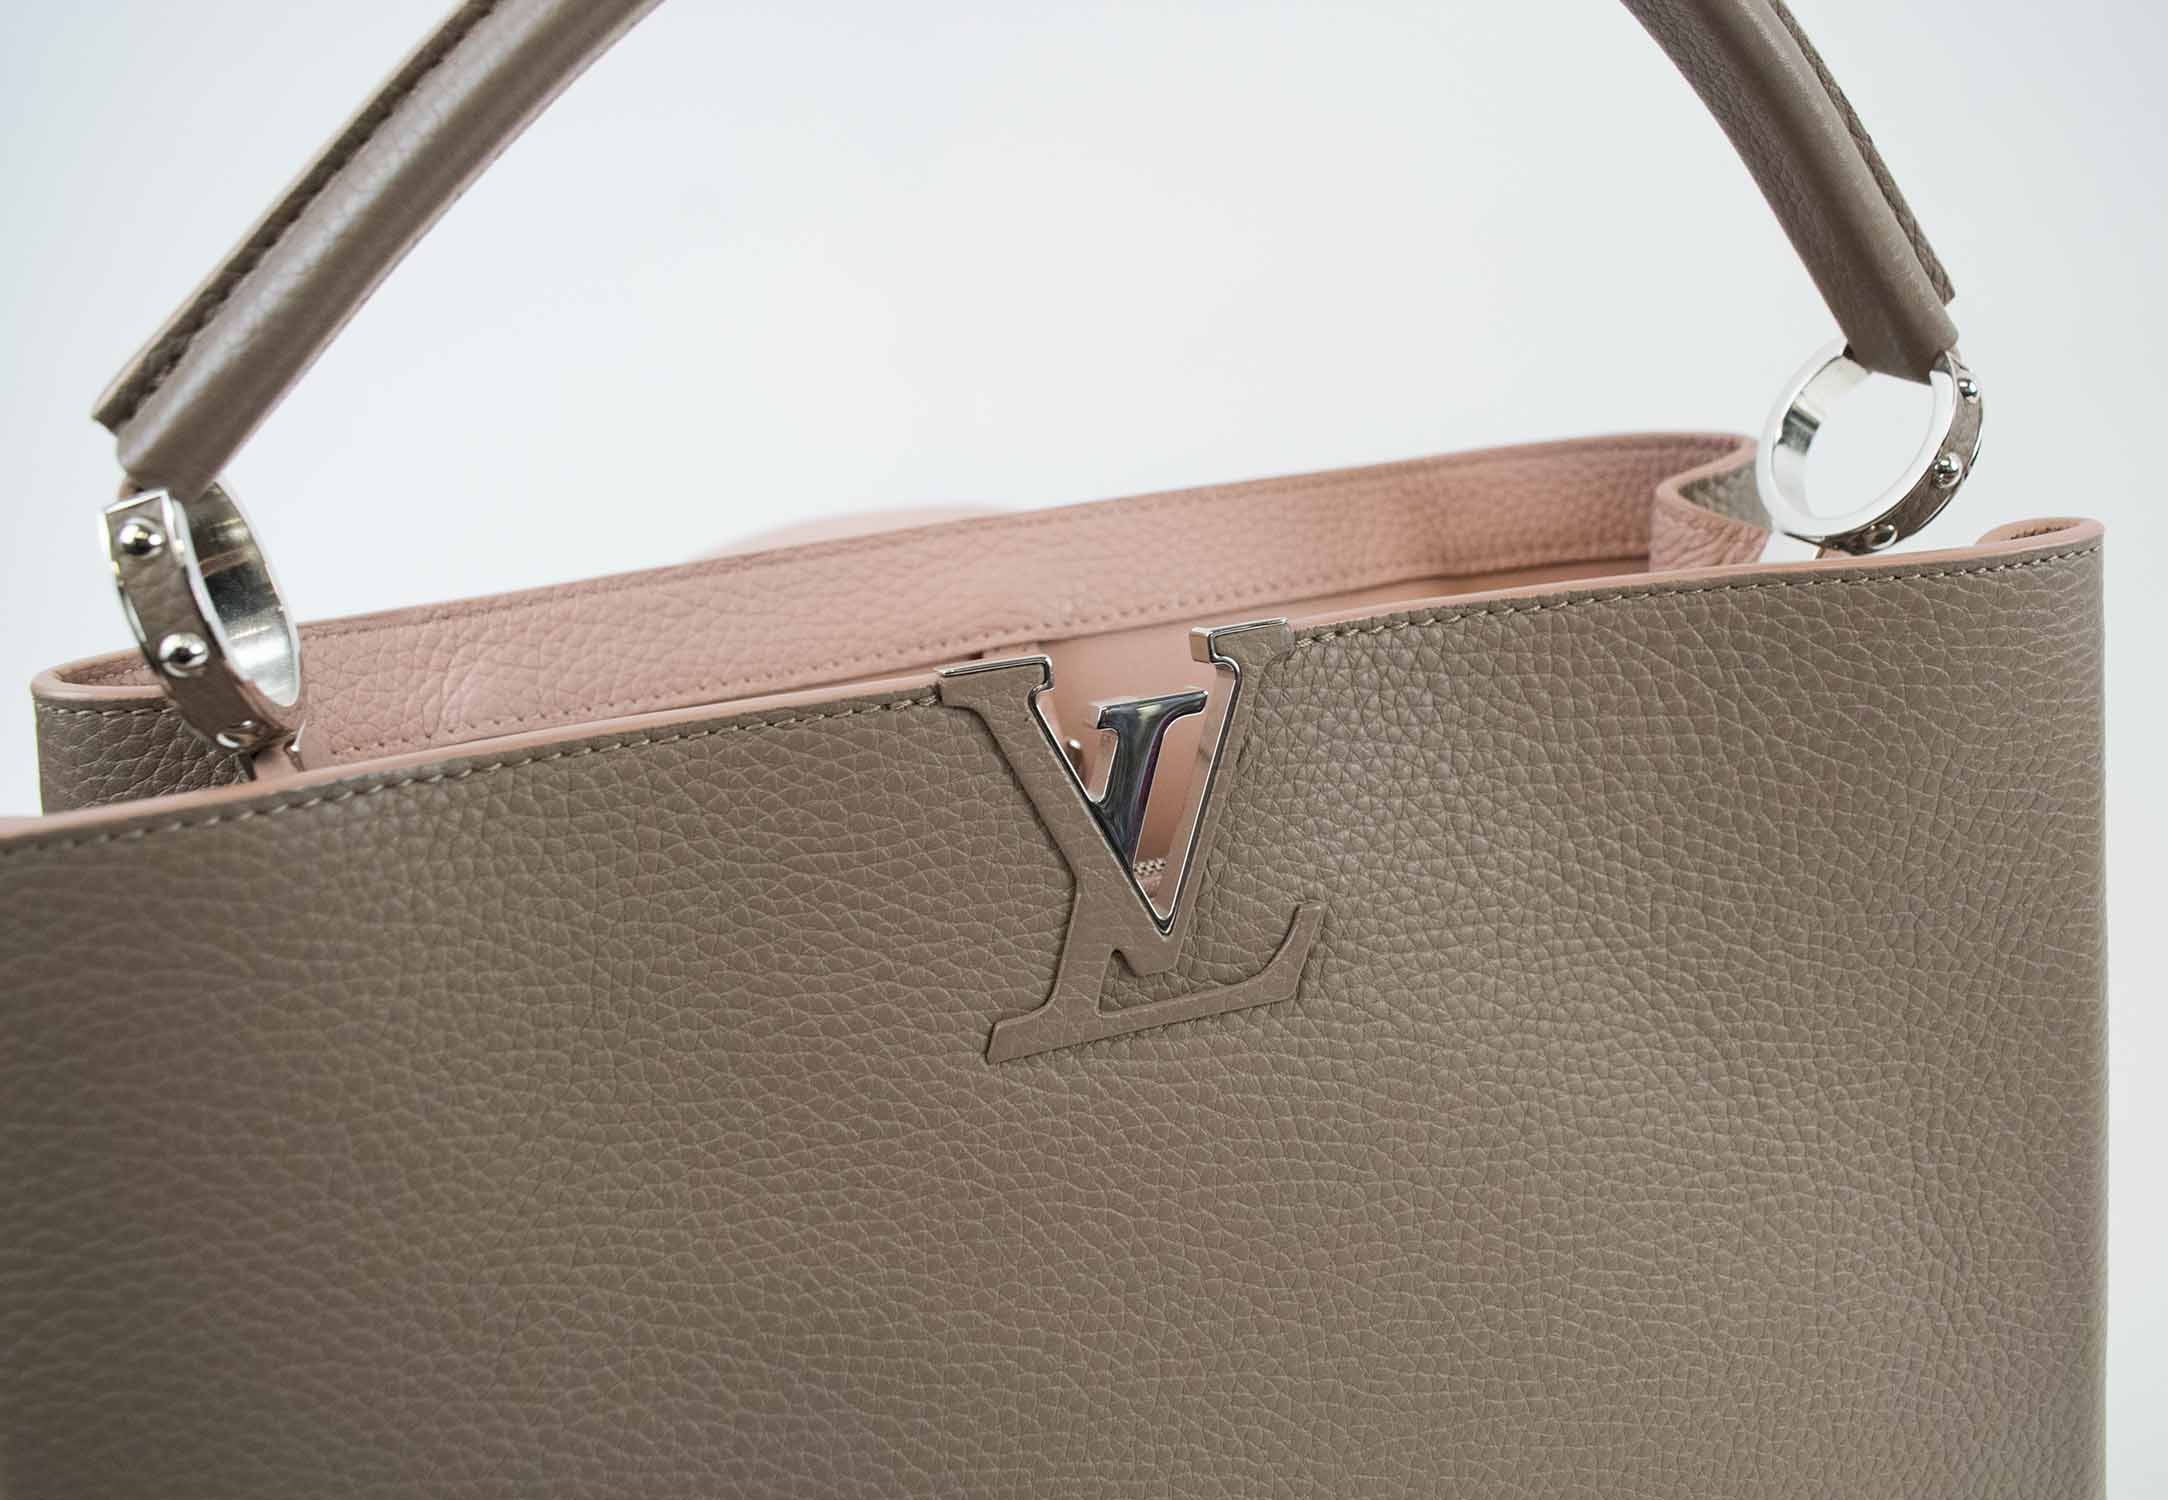 LOUIS VUITTON CAPUCINES MM, leather with leather pink interior